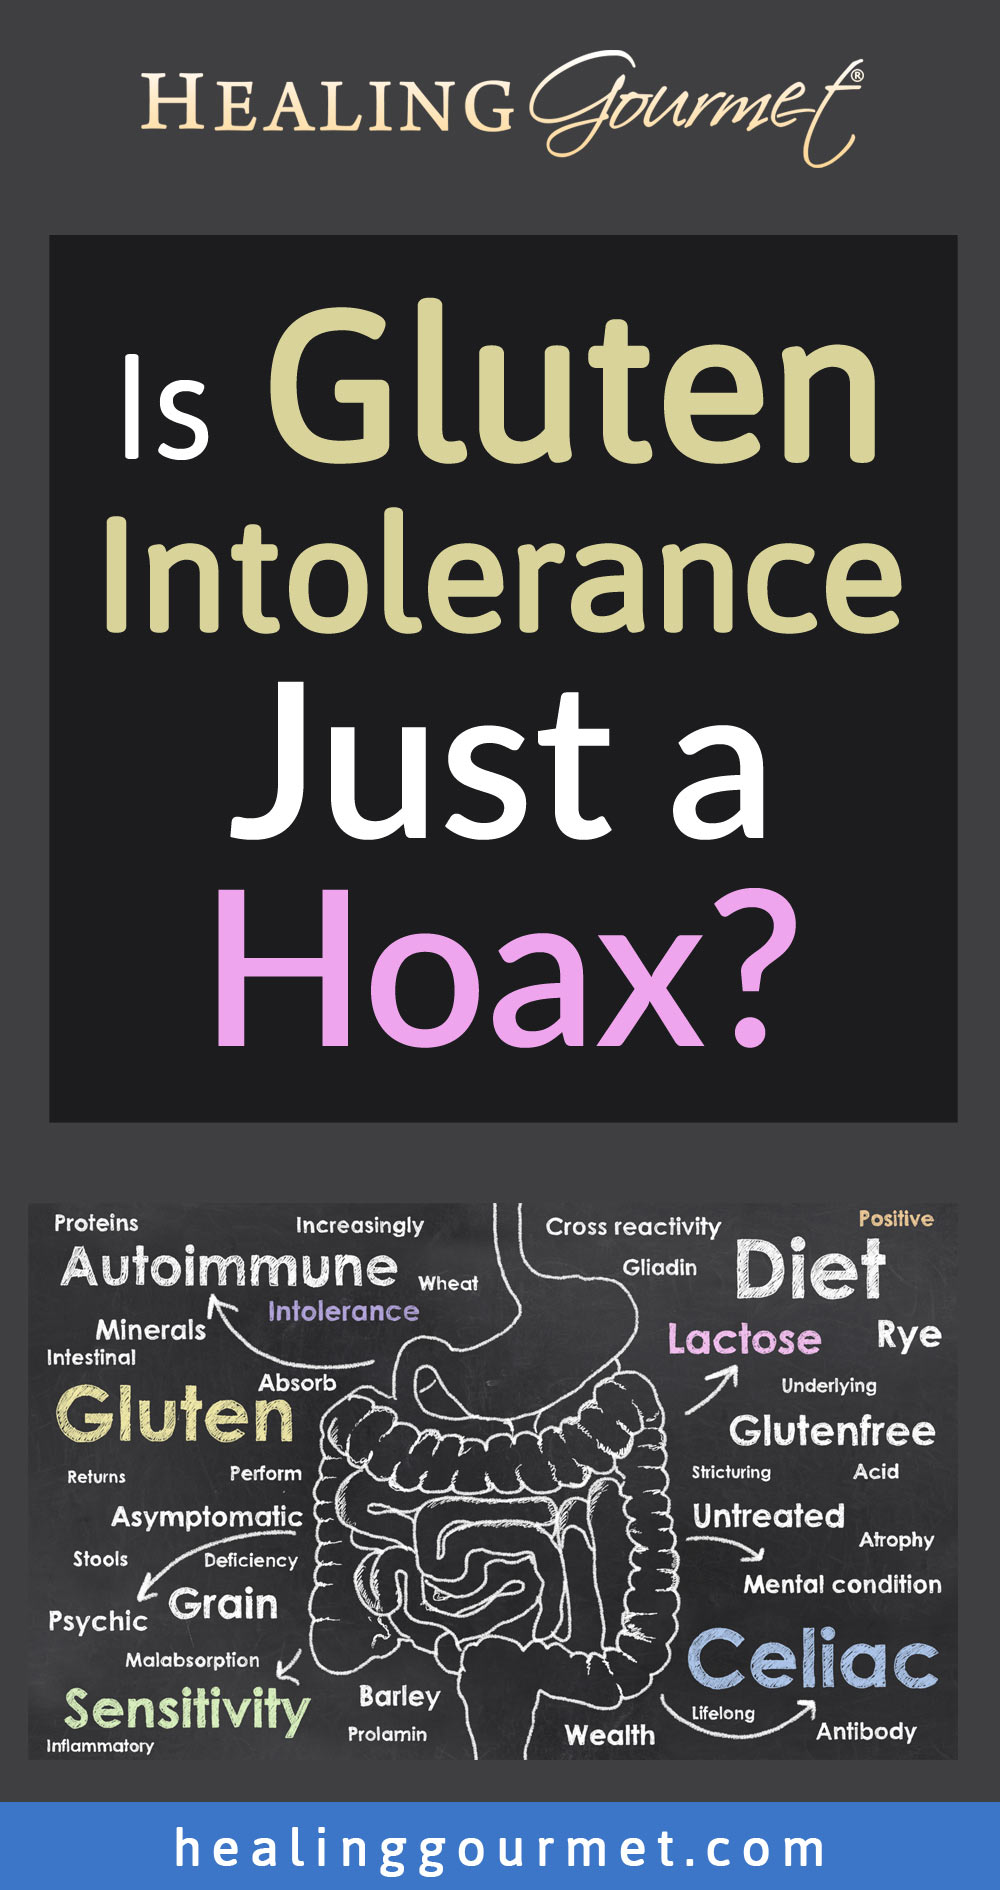 Is Gluten Intolerance Real – or a Made-Up Hoax?